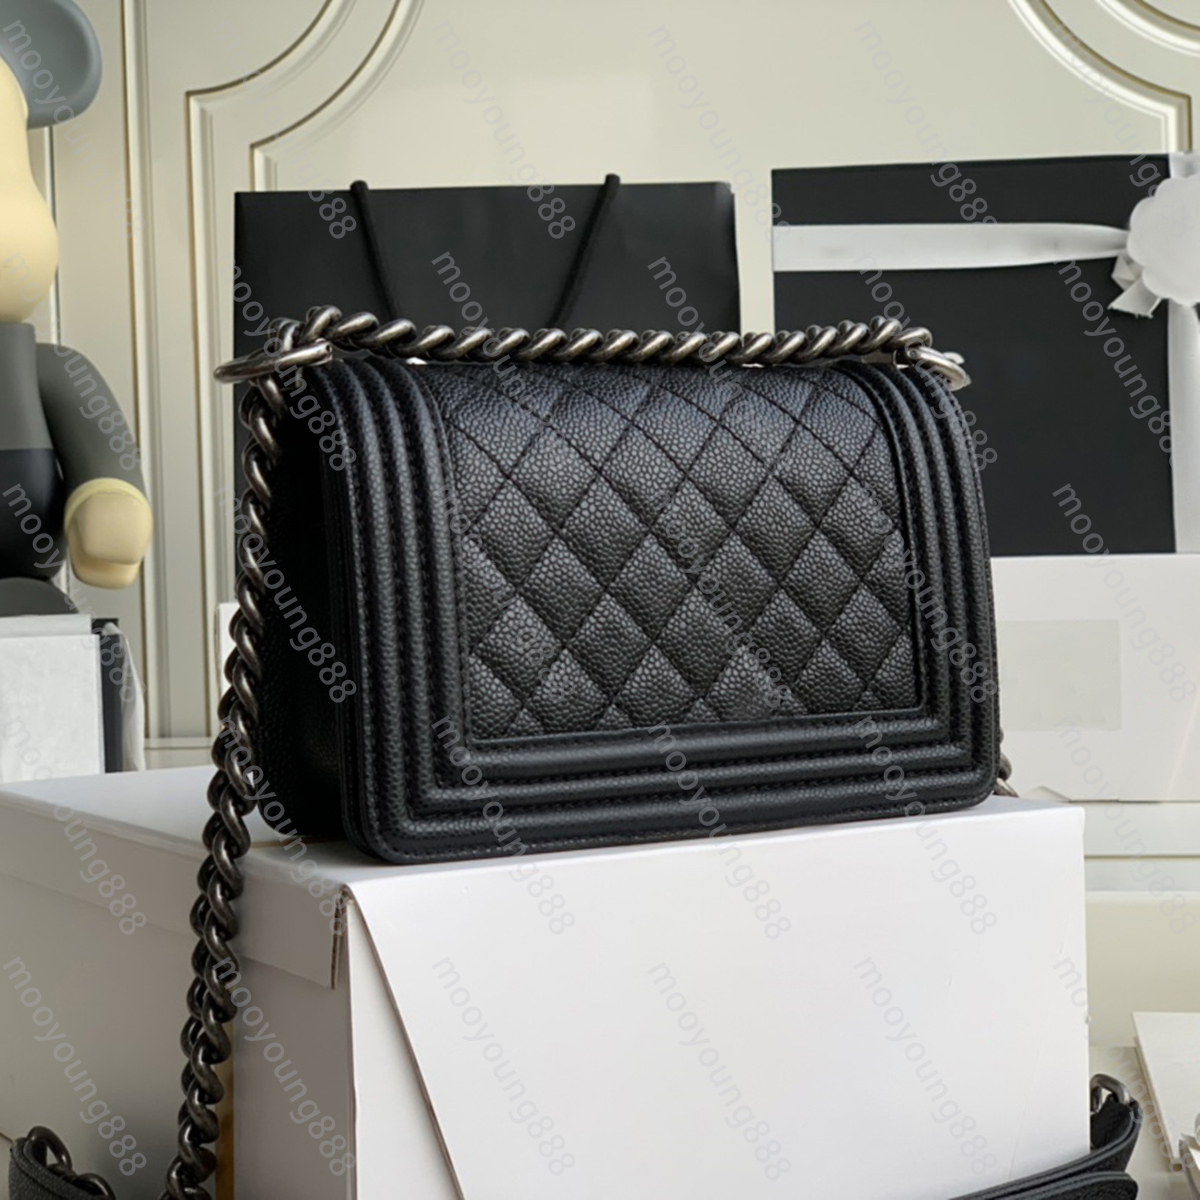 

10A Top Tier Mirror Quality Luxuries Designers Small Caviar Boy Bag Handbag Women Real Leather Lambskin Quilted Purse Flap Bag Black Shoulder Box Bags Wallet On Chain, Upload pics to contact us